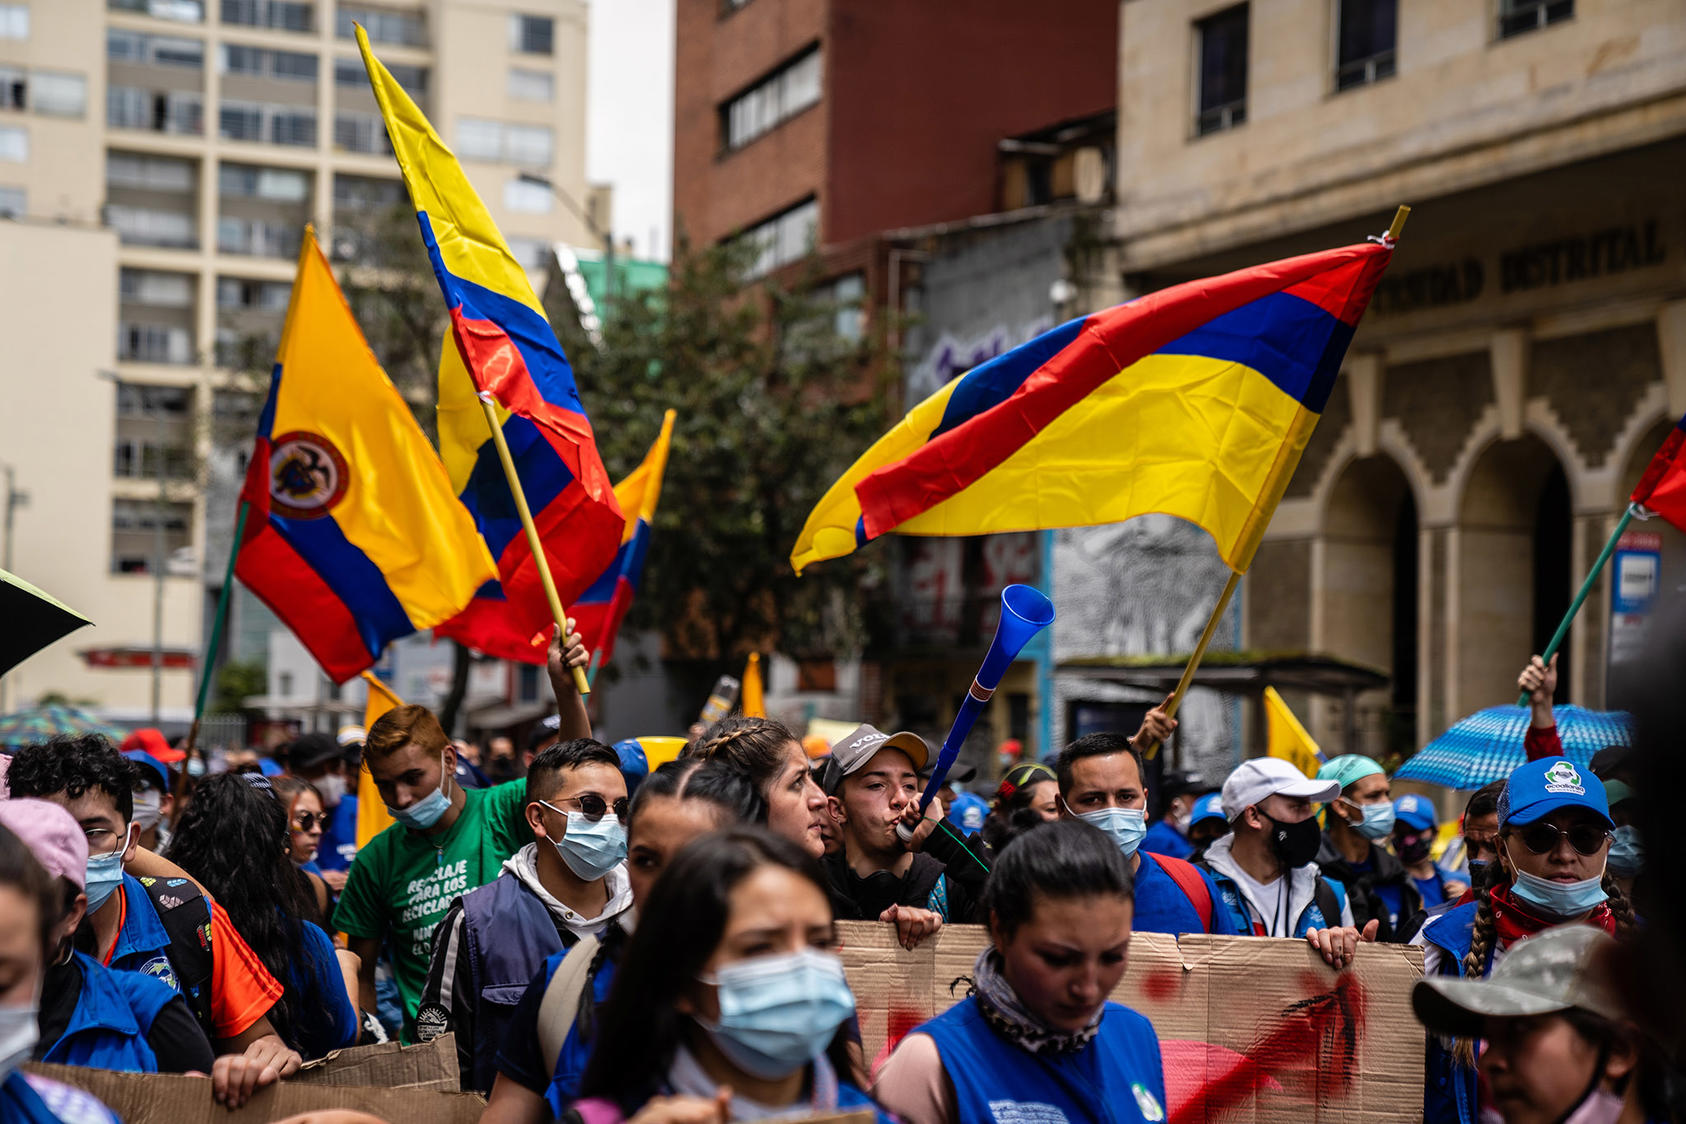 People march to protest the government in Bogota, Colombia, Wednesday, May 5, 2021. (Federico Rios/The New York Times)